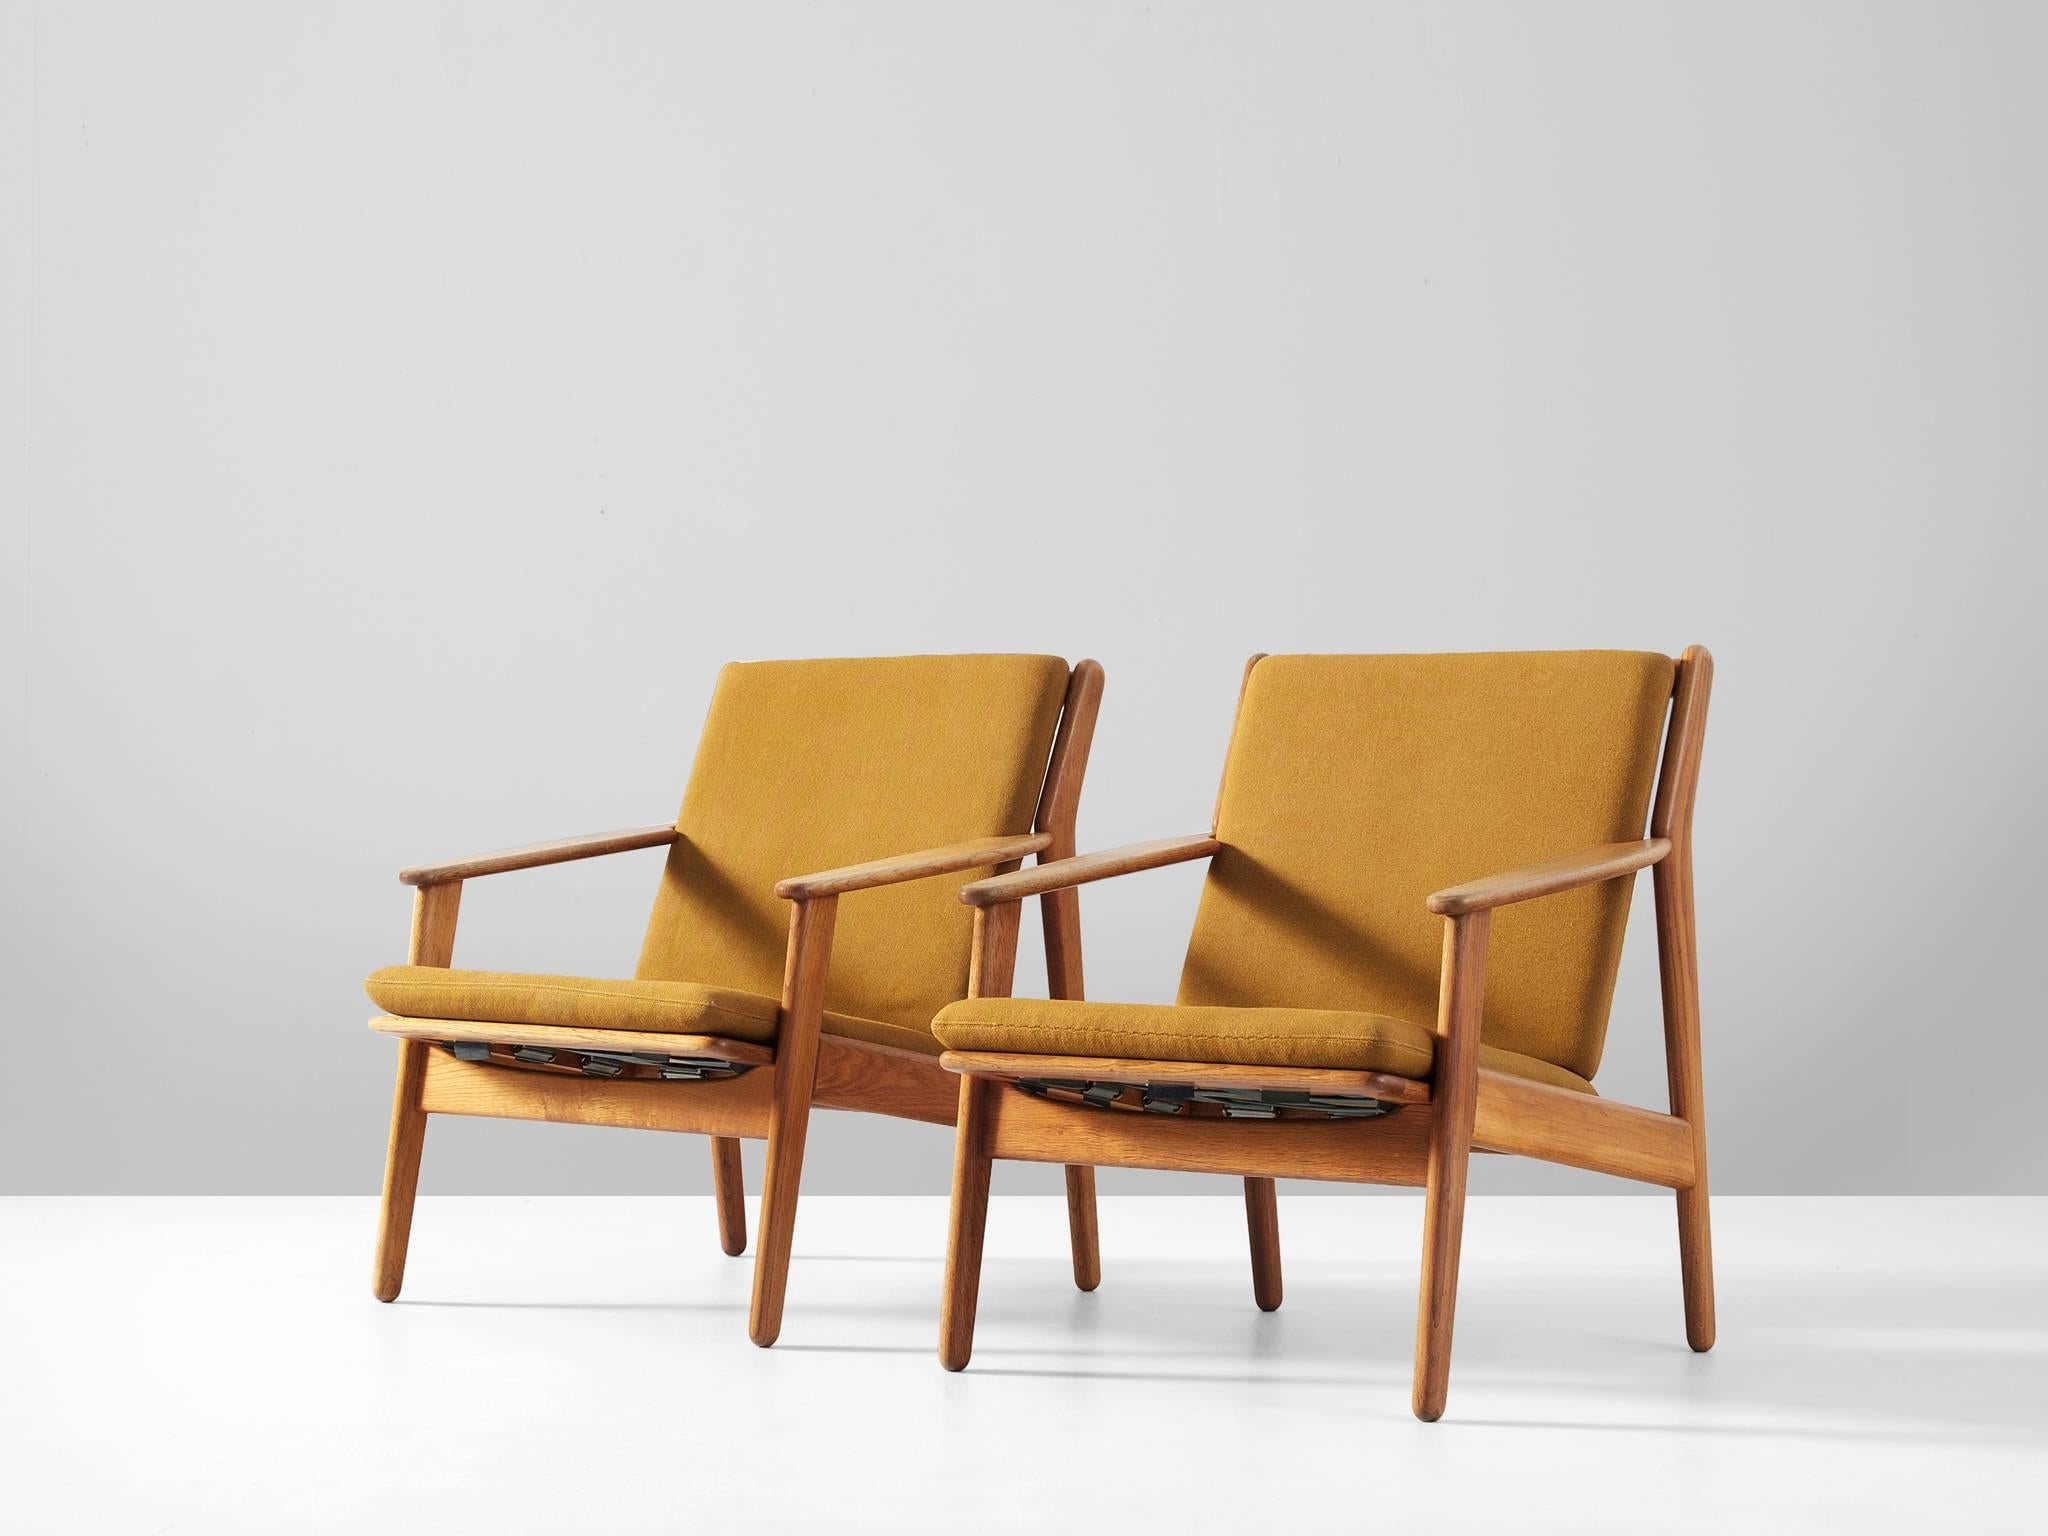 Pair of armchairs model J55, in oak and fabric, by Poul M. Volther for FDB Møbler, Denmark 1955.

Elegant pair of lounge chairs. The wooden frame of solid oak shows some interesting lines and details. The back nicely runs over into the hind-legs.